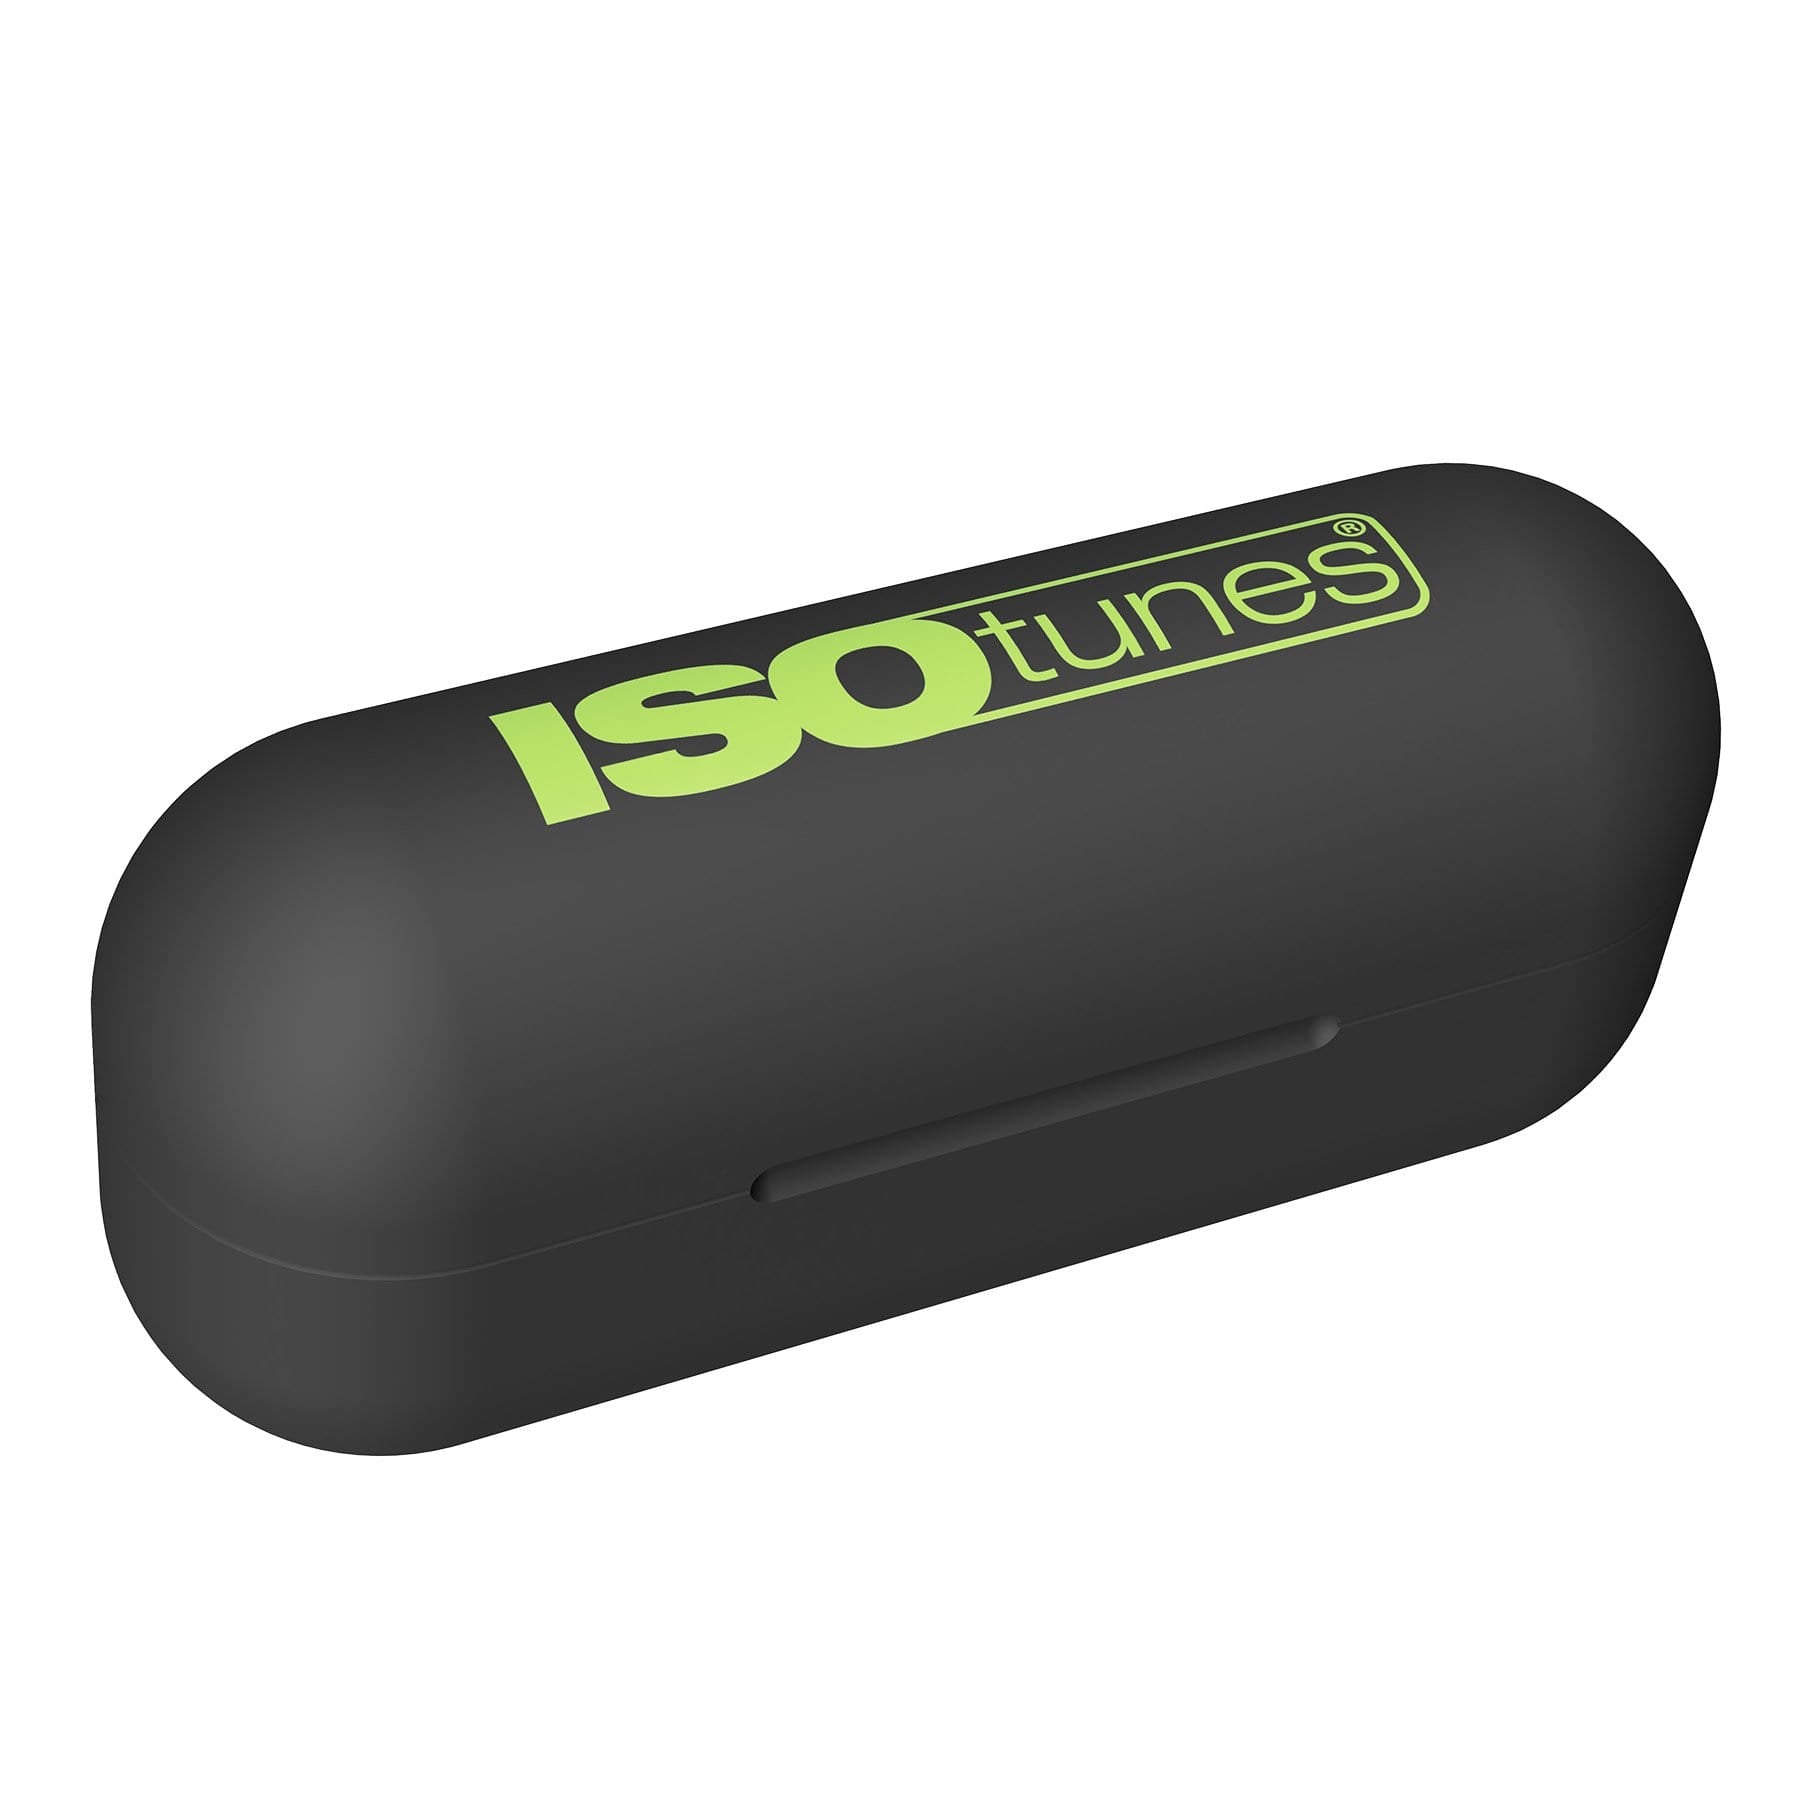 ISOtunes FREE Earbuds with Bluetooth Technology for Hearing Protection